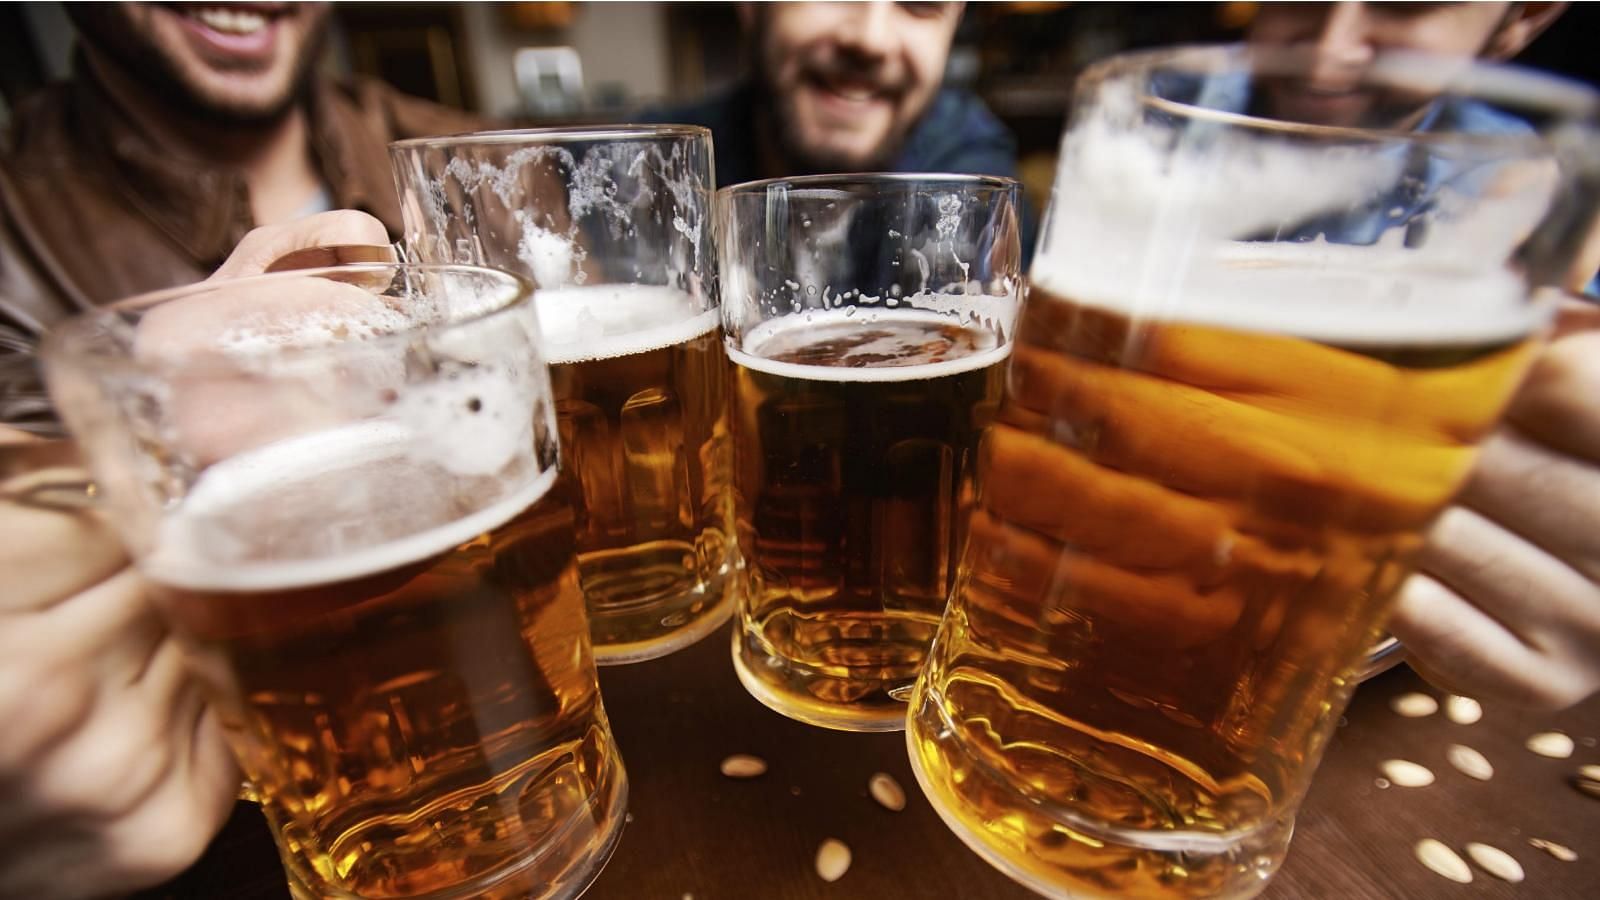 A new study finds that heavy alcohol use may slow the rate of growth in developing brains.